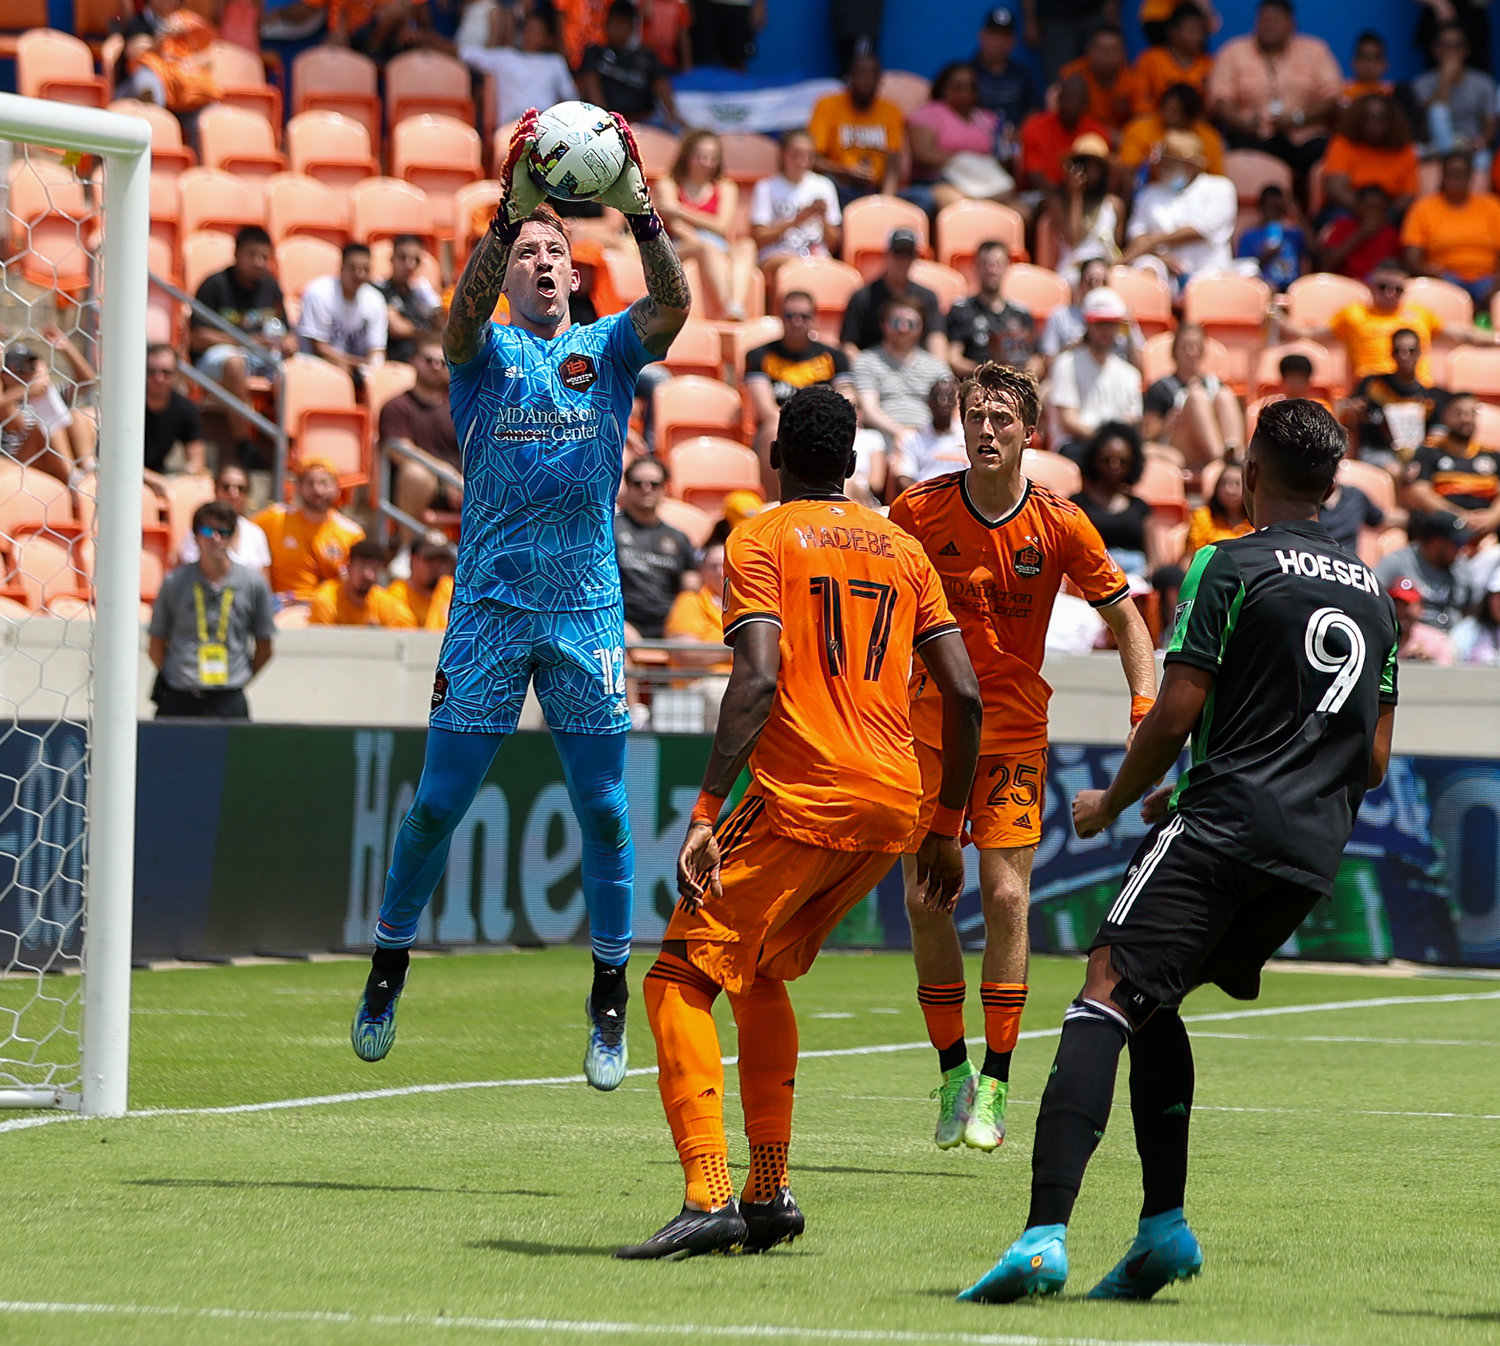 Houston Dynamo goalkeeper Steve Clark (12) leaps to make a stop during the second half of a Major League Soccer match between the Houston Dynamo and Austin FC on April 30, 2022 in Houston, Texas.